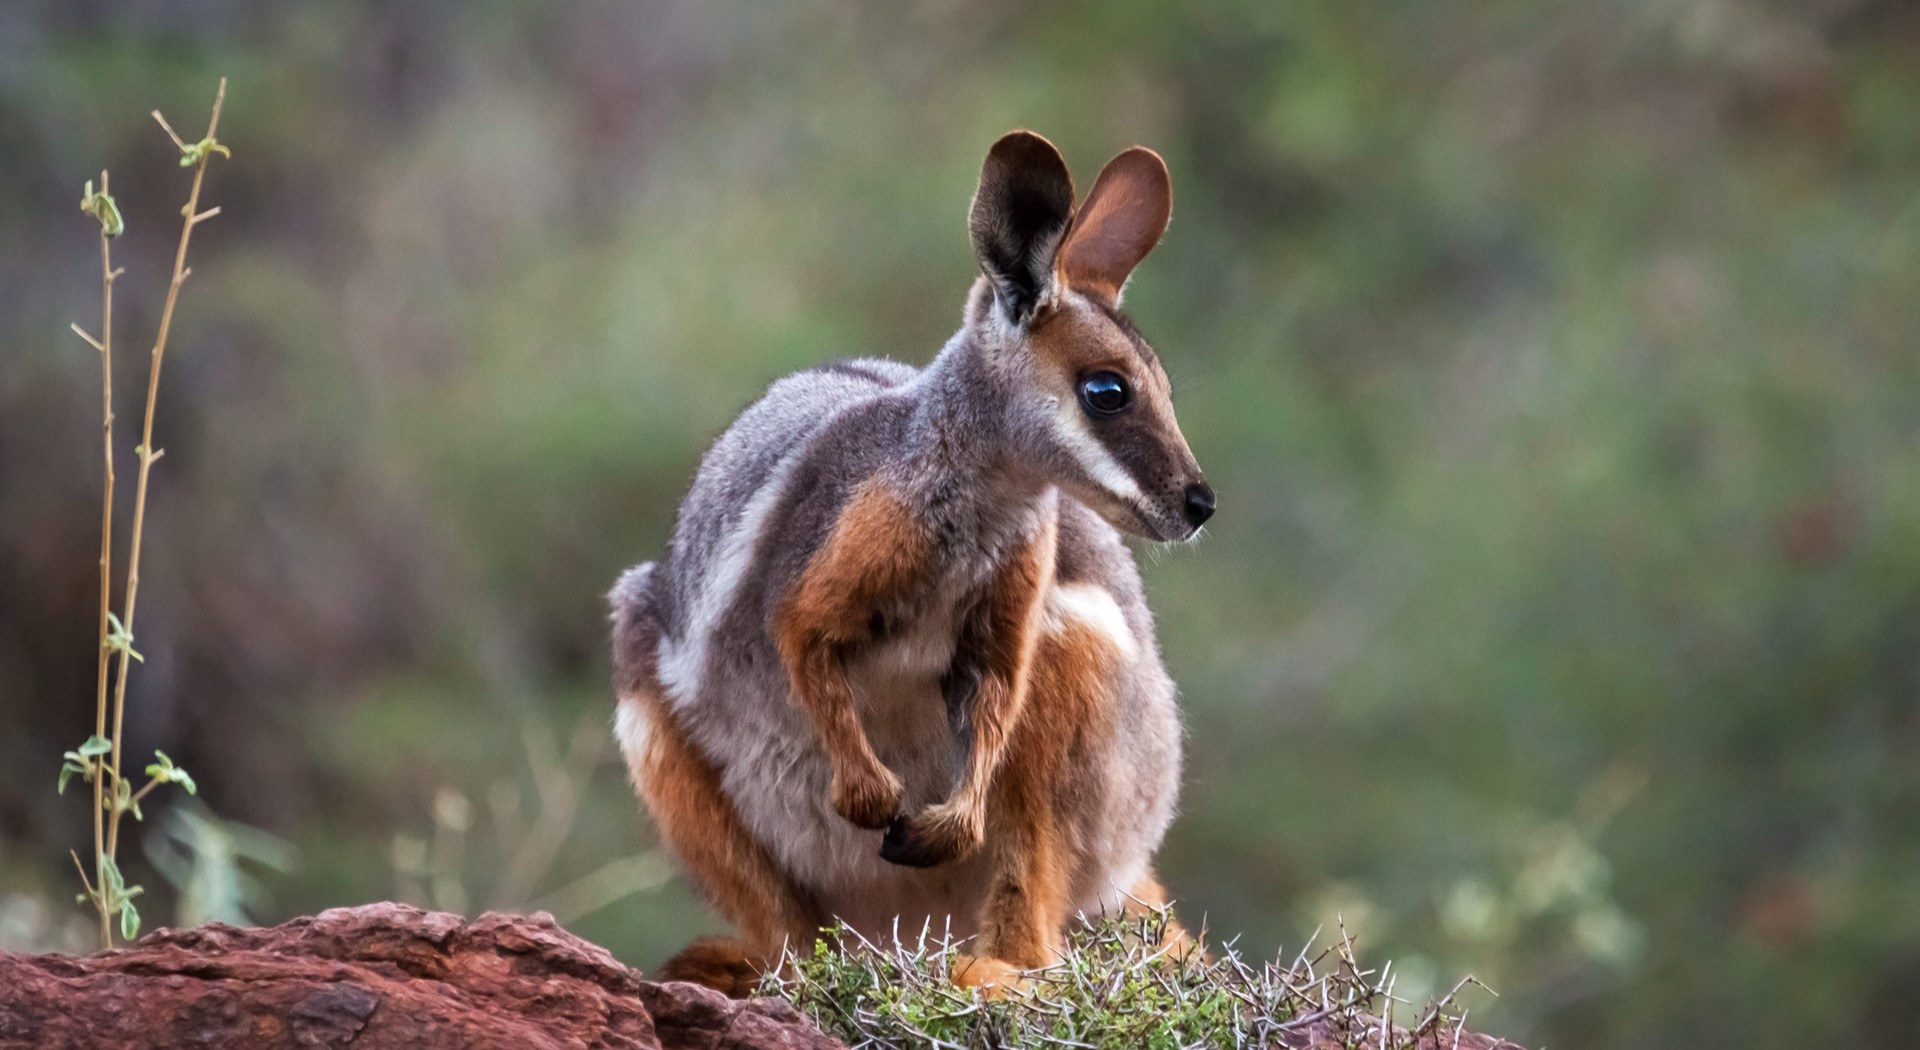 Yellow-footed rock wallaby